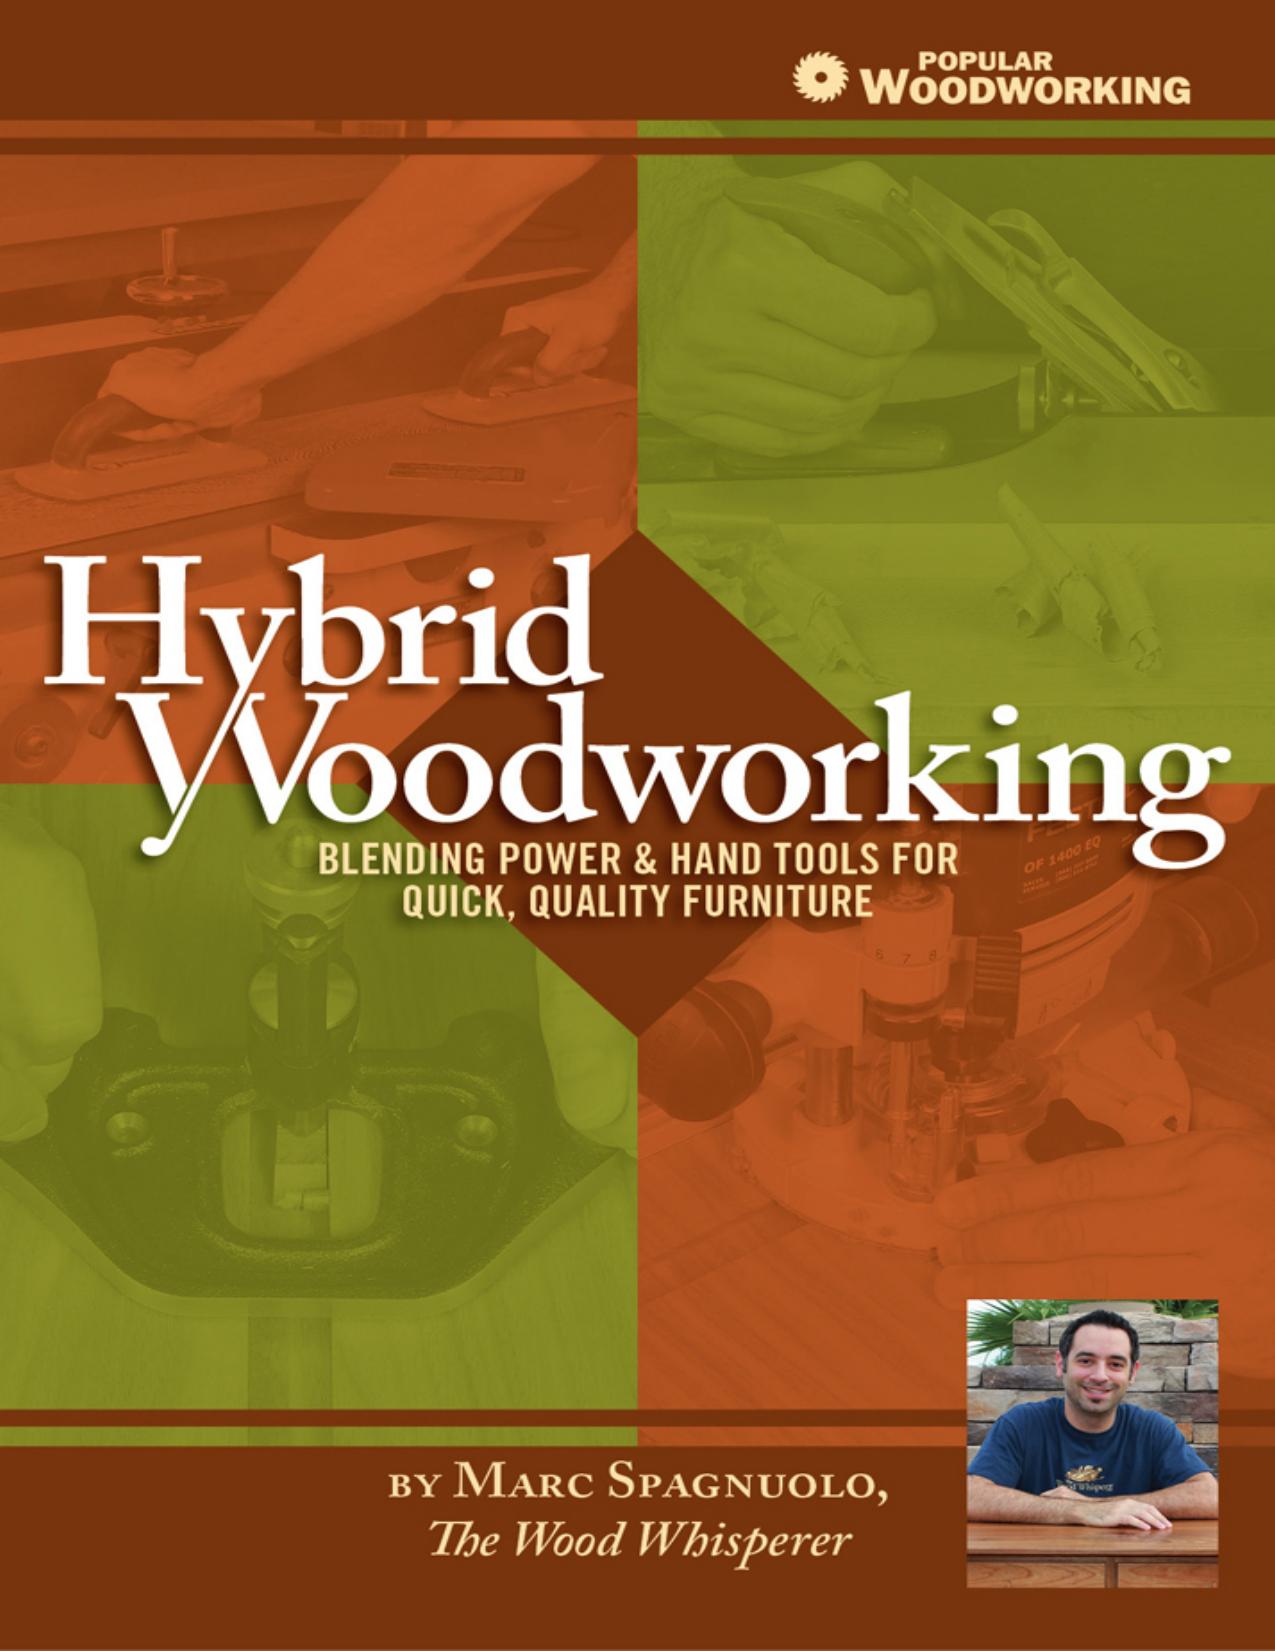 Hybrid Woodworking by Marc Spagnuolo